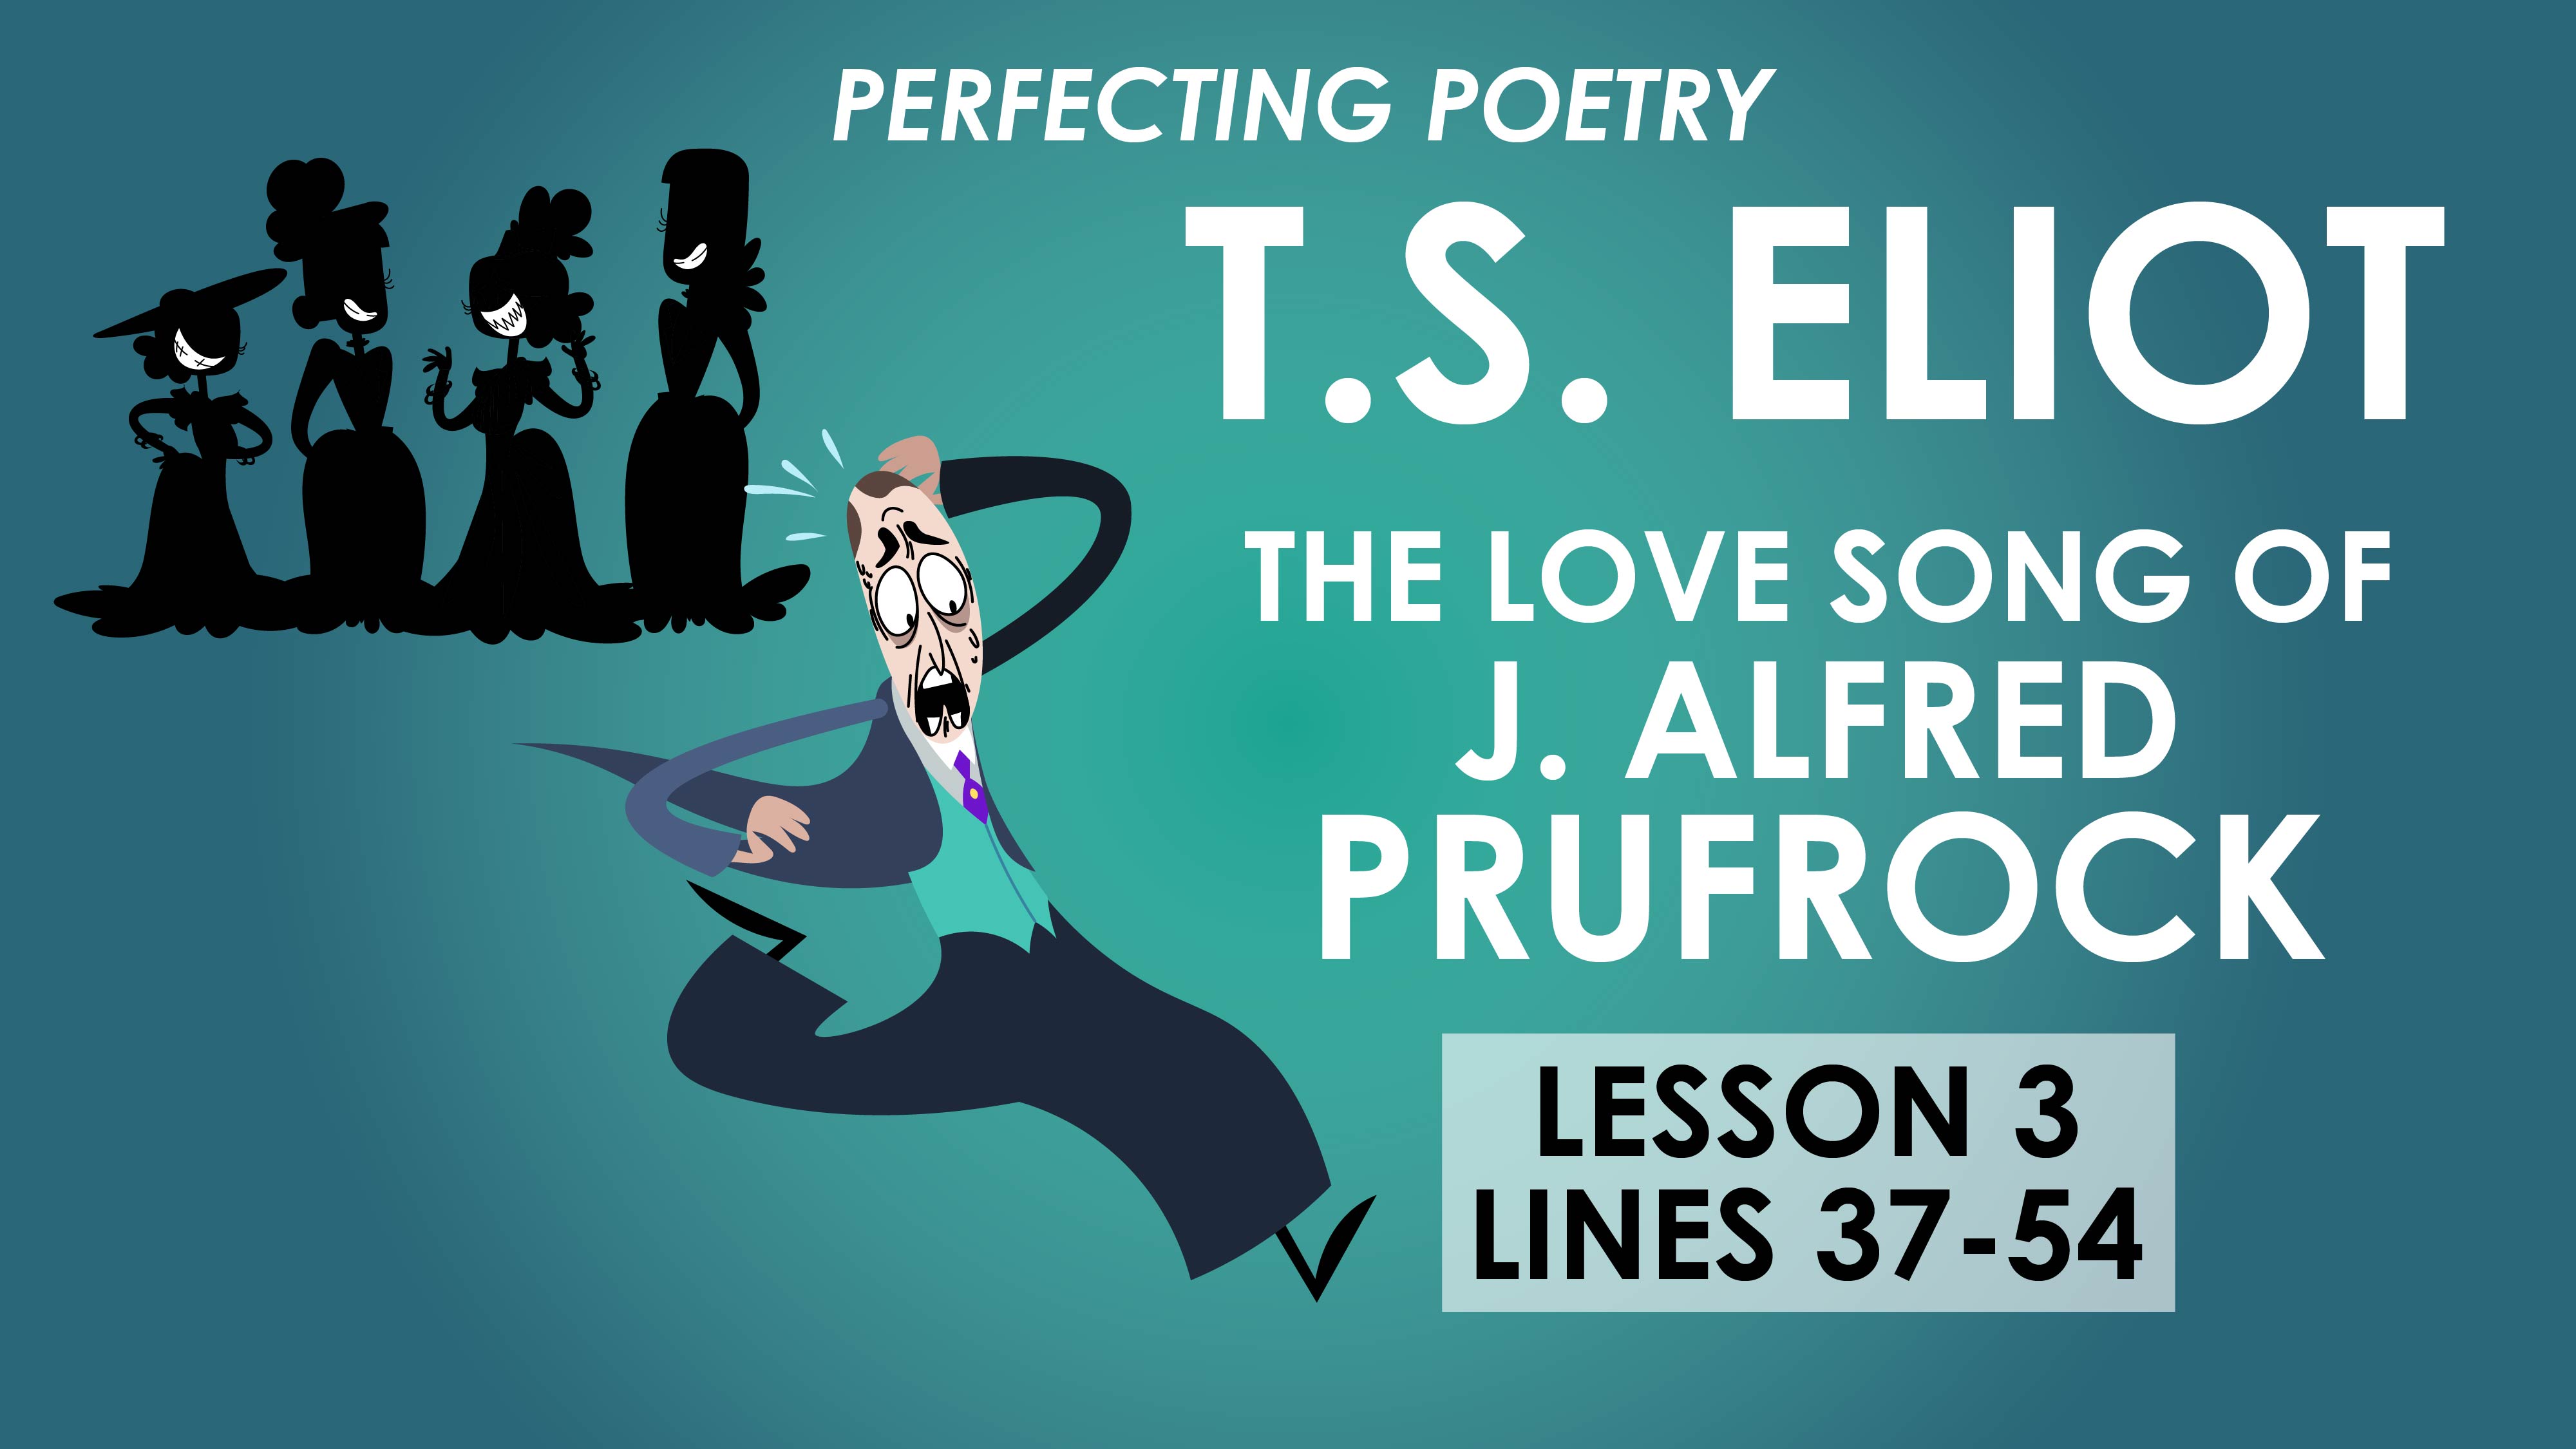 The Love Song of J. Alfred Prufrock - Lesson 3 - T.S. Eliot - Perfecting Poetry